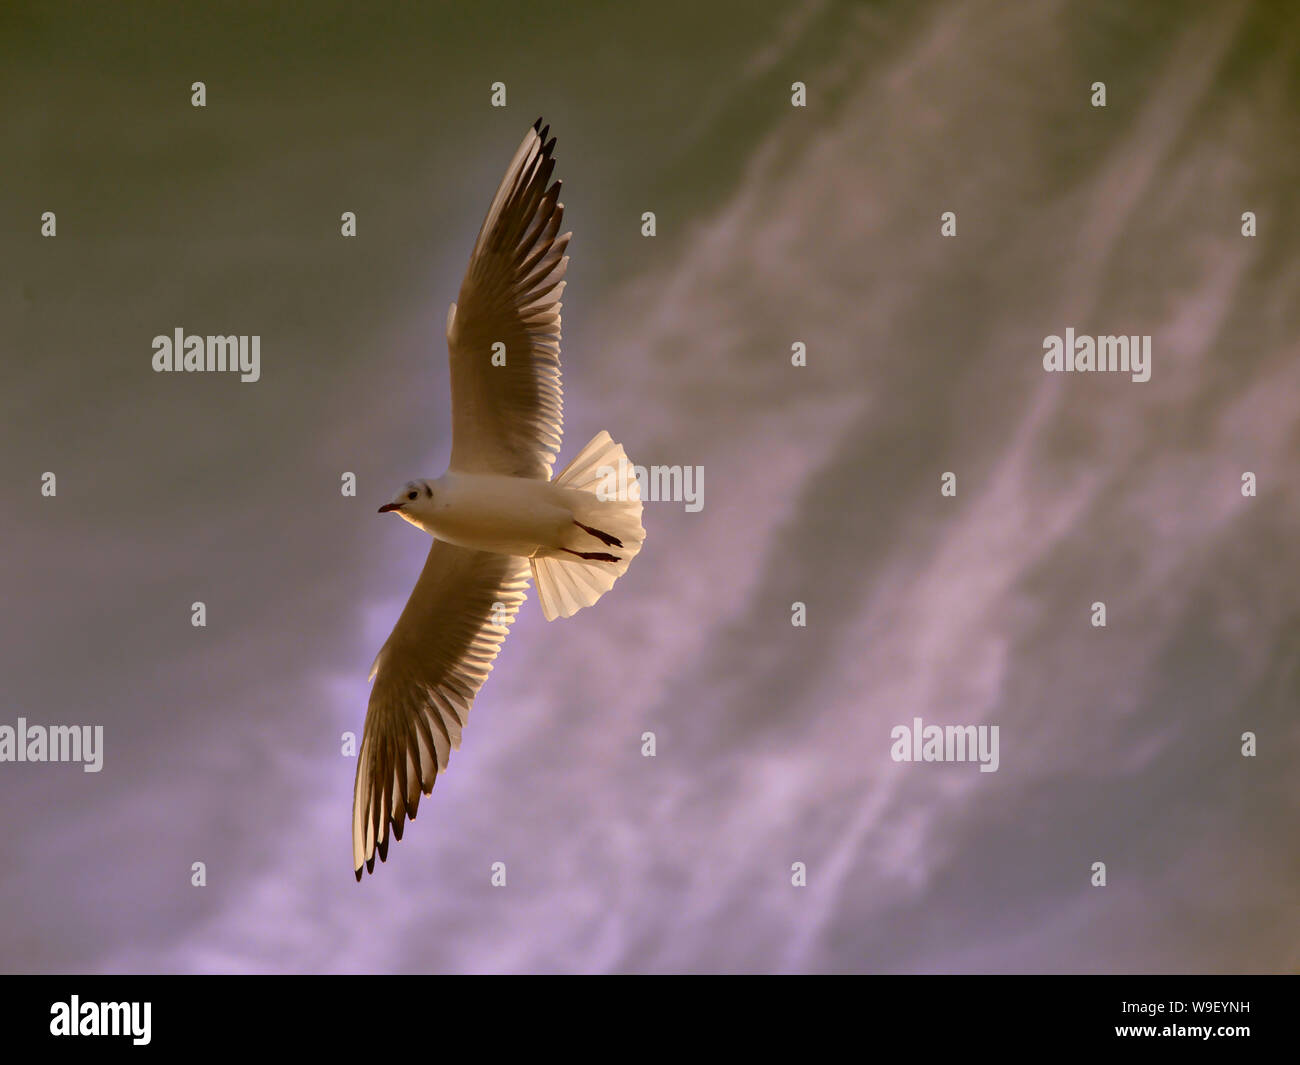 Gull (Larus ) in flight seen from below on cloudy sky background, taken against the light Stock Photo